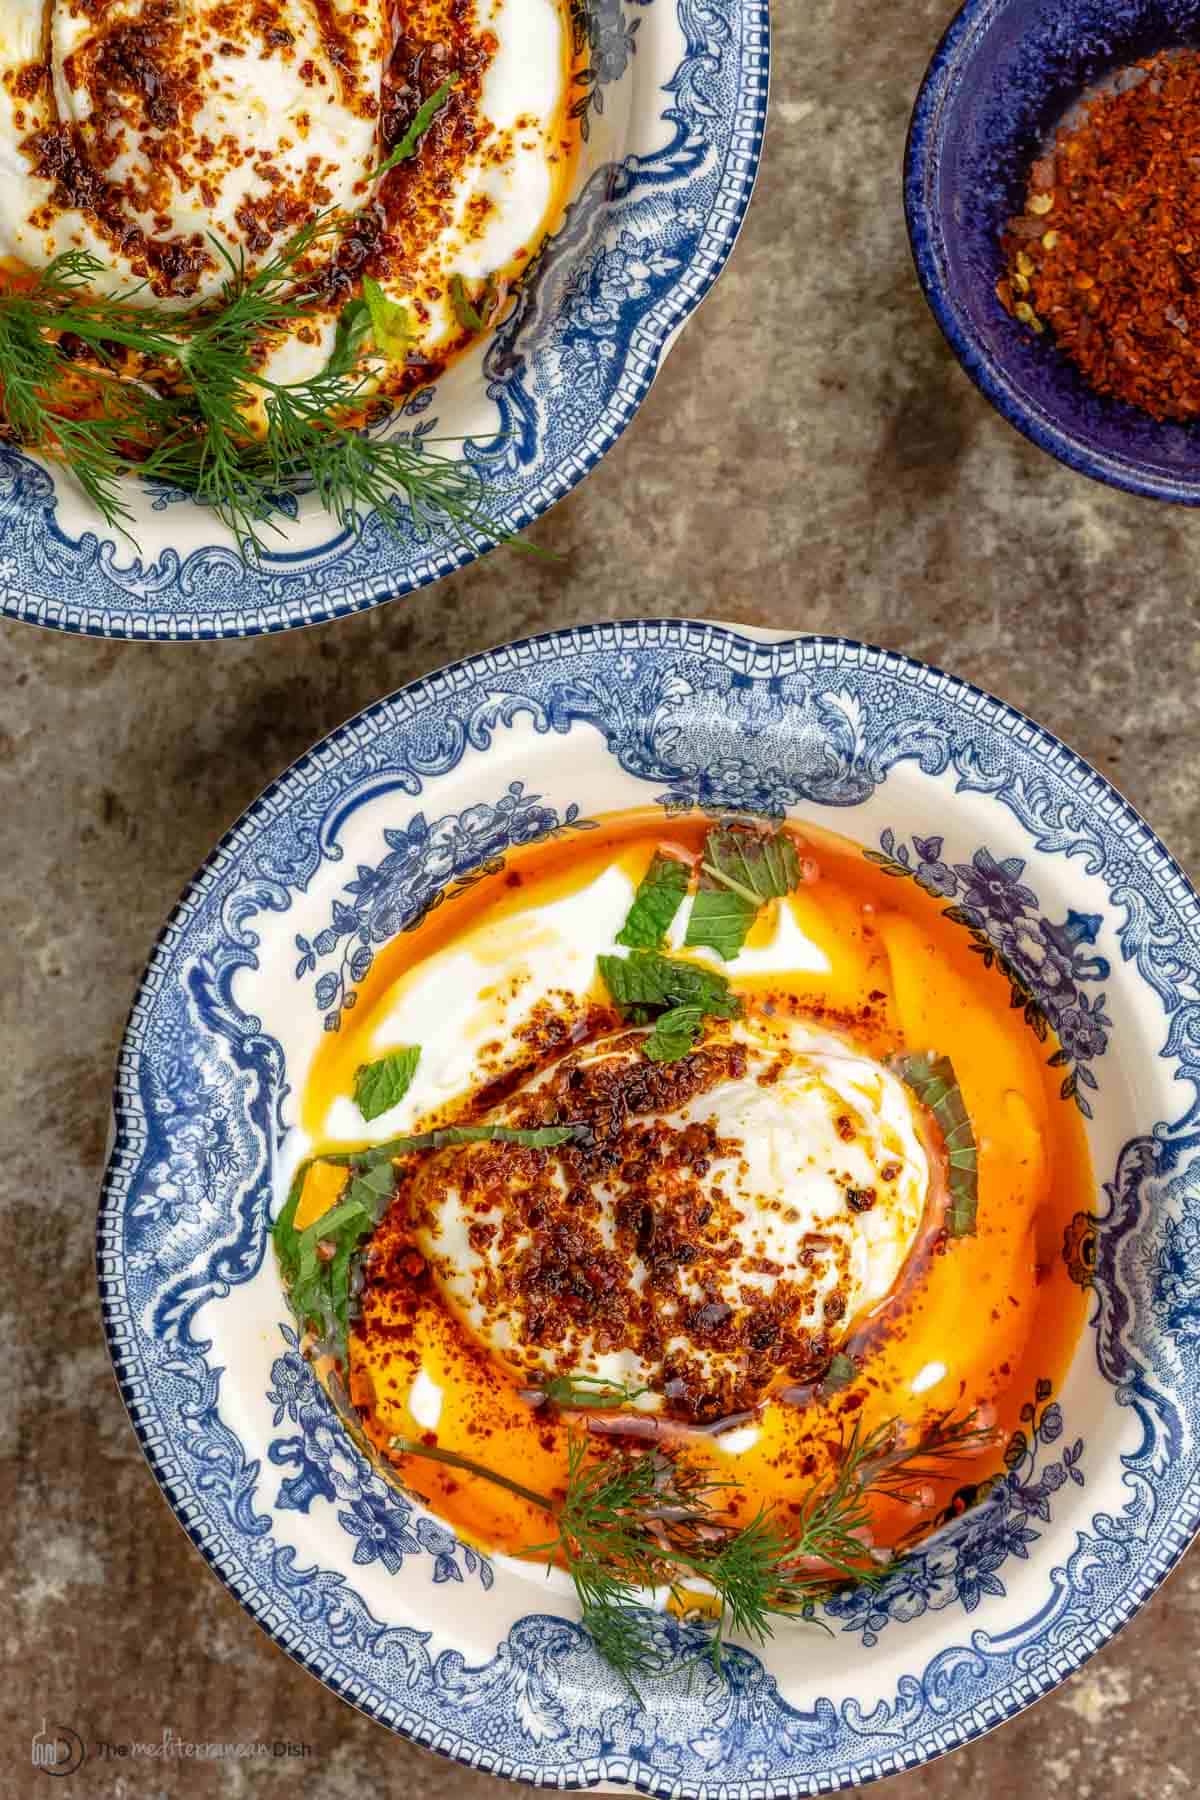 cilbir topped with aleppo pepper in a blue and white dish